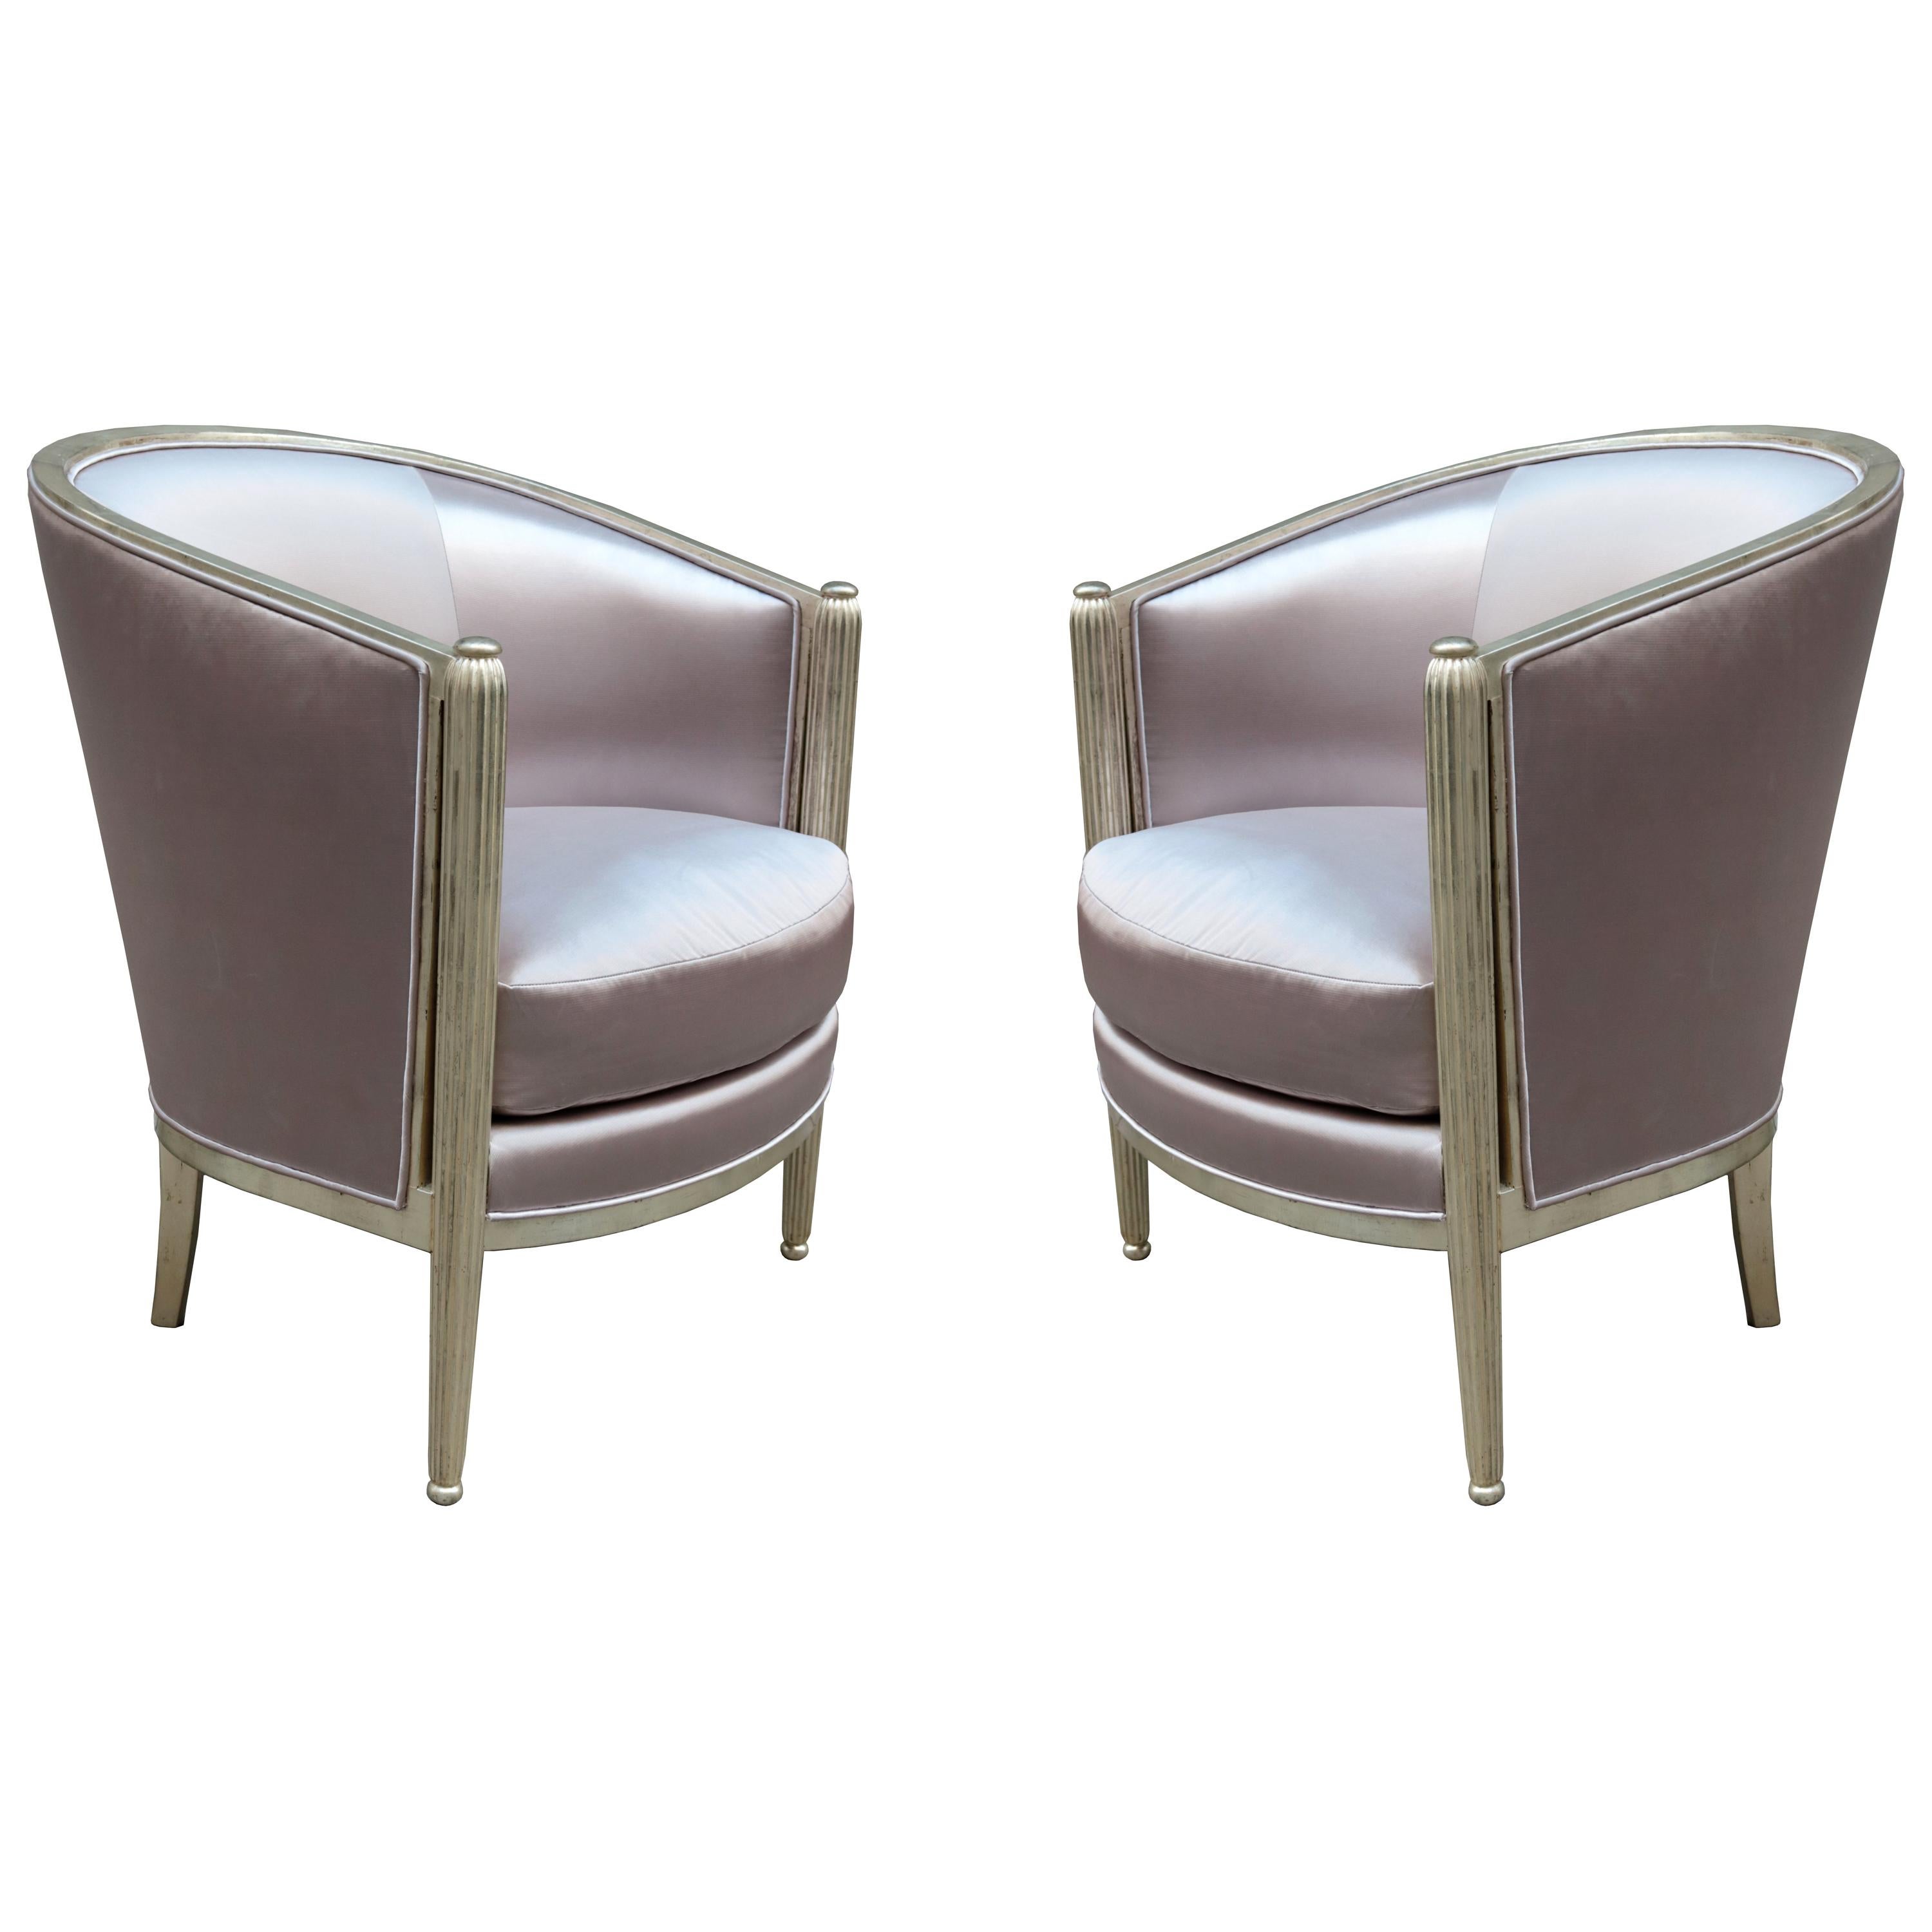 Pair of Art Deco Giltwood Armchairs